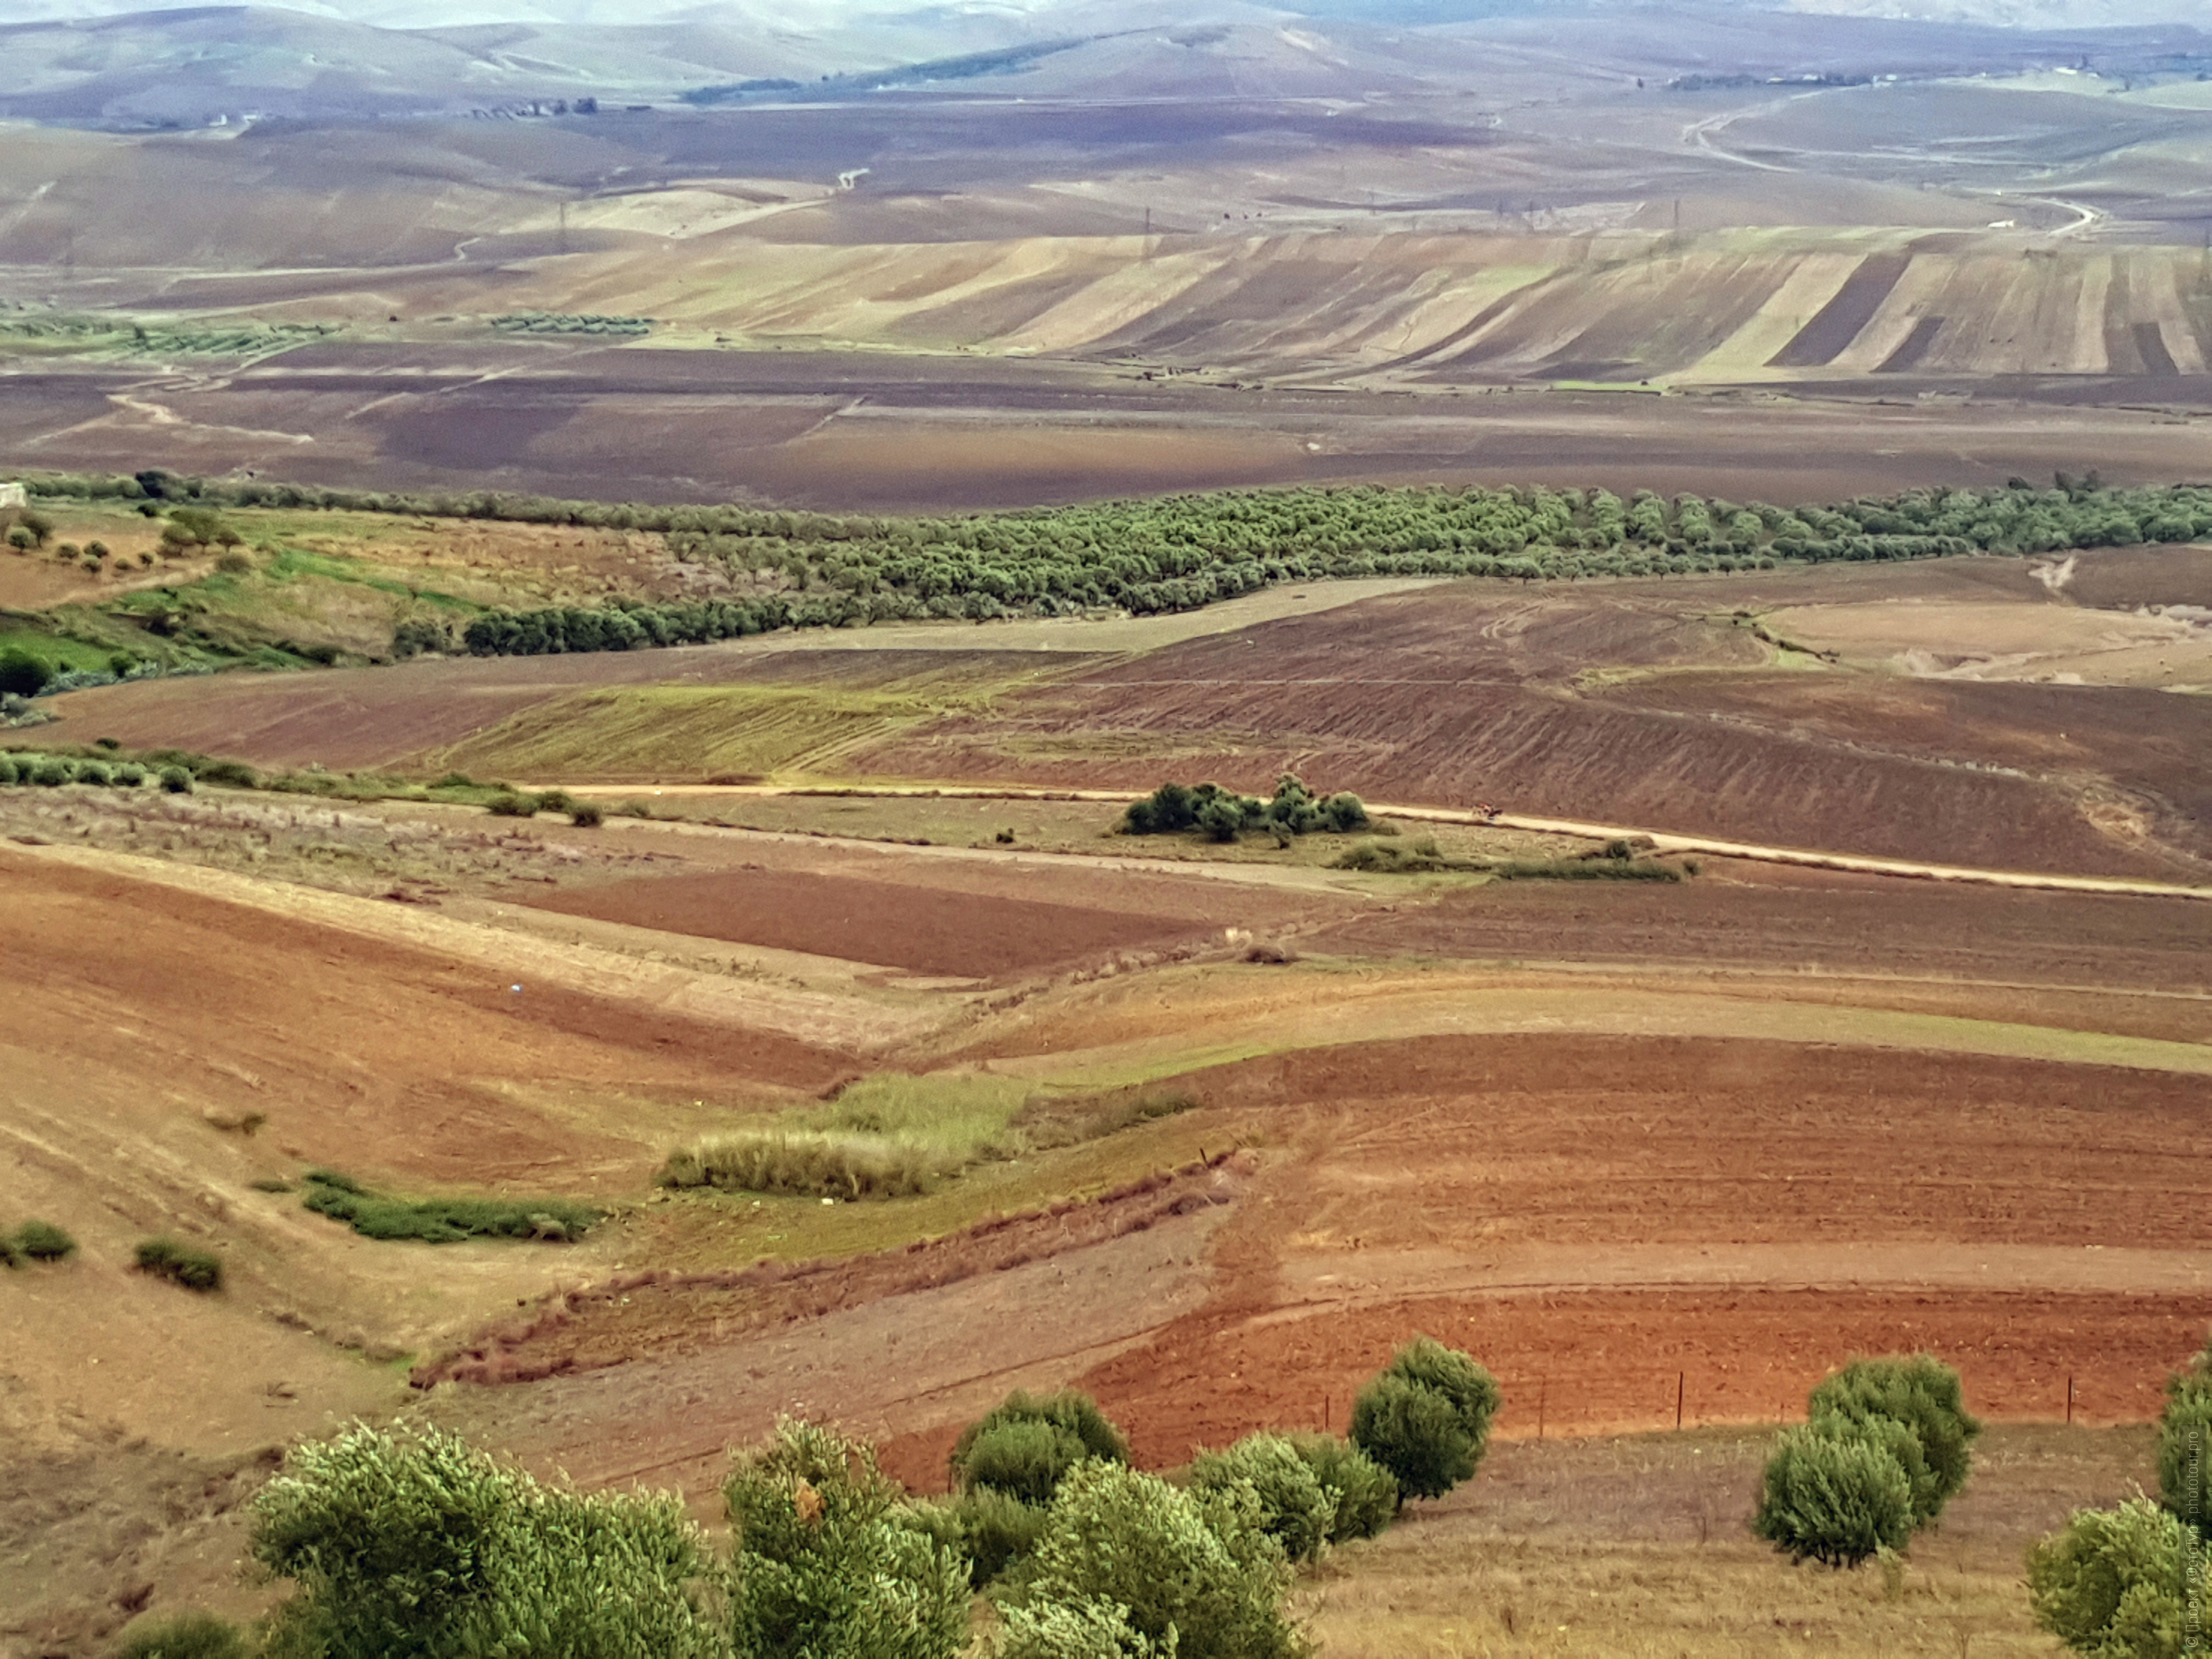 Landscapes of the plains and fields of Morocco. Adventure photo tour: medina, cascades, sands and ports of Morocco, April 4 - 17, 2020.